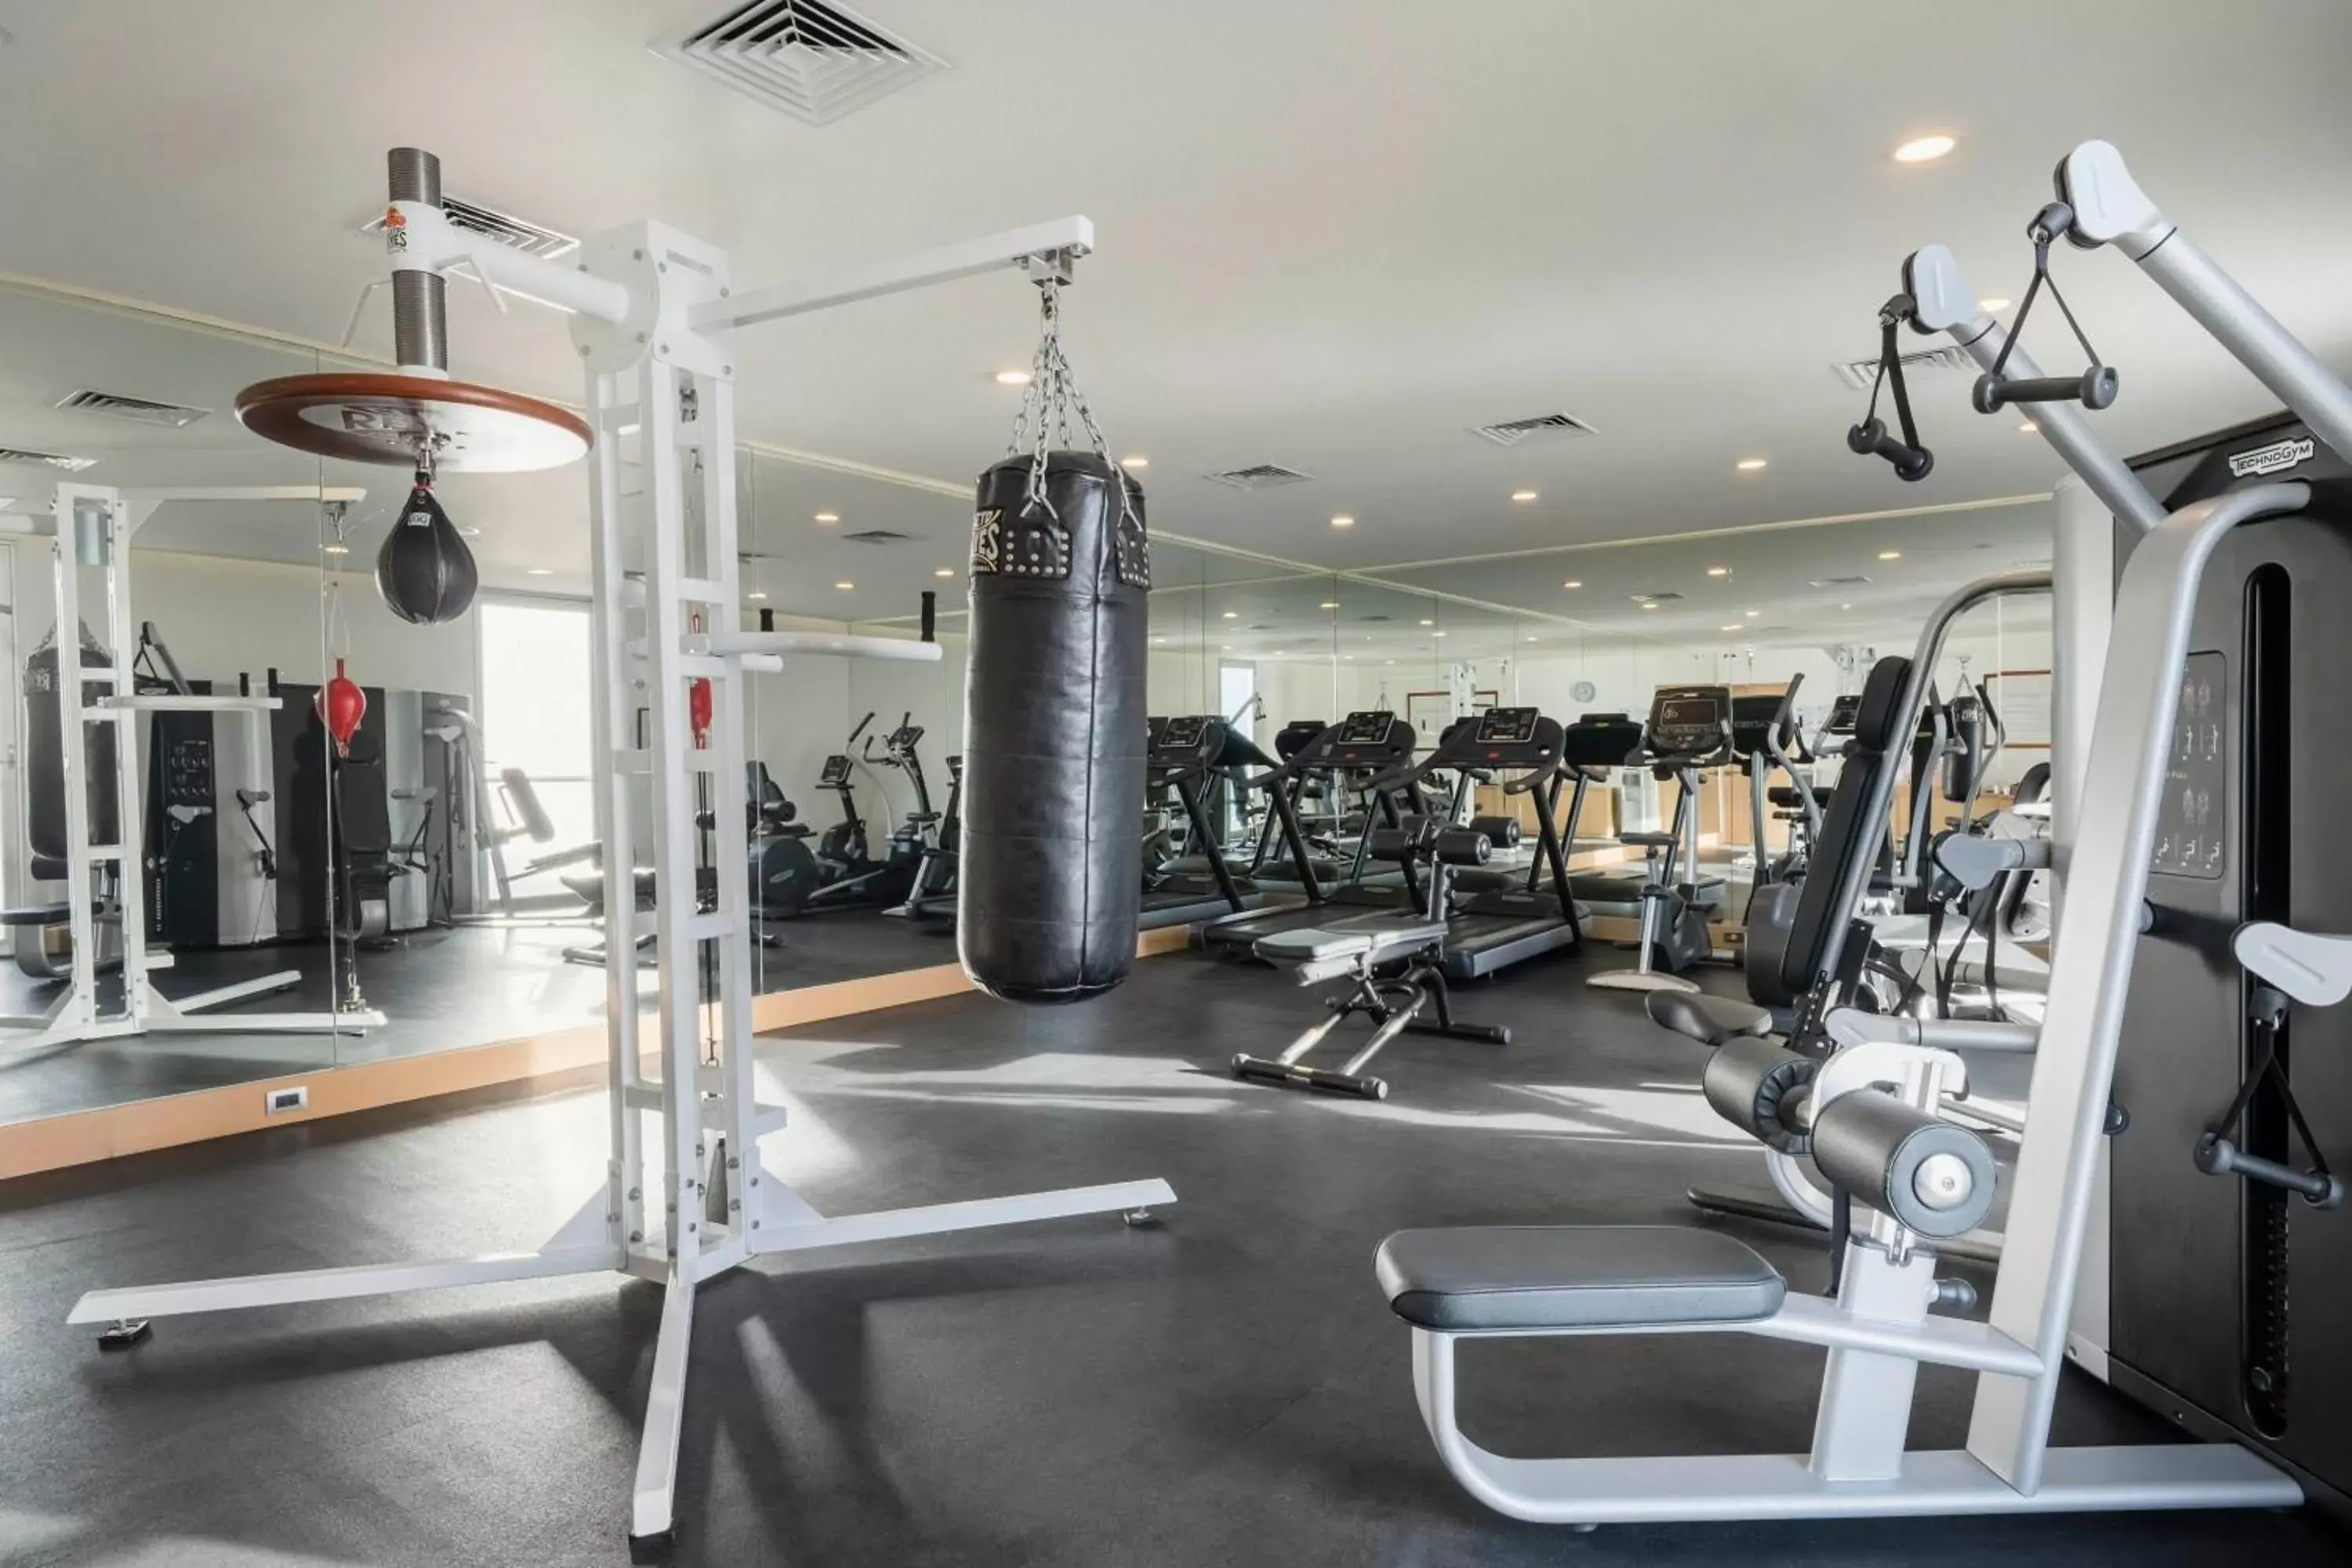 Fitness centre/facilities, Fitness Center/Facilities in Hotel NYX Cancun